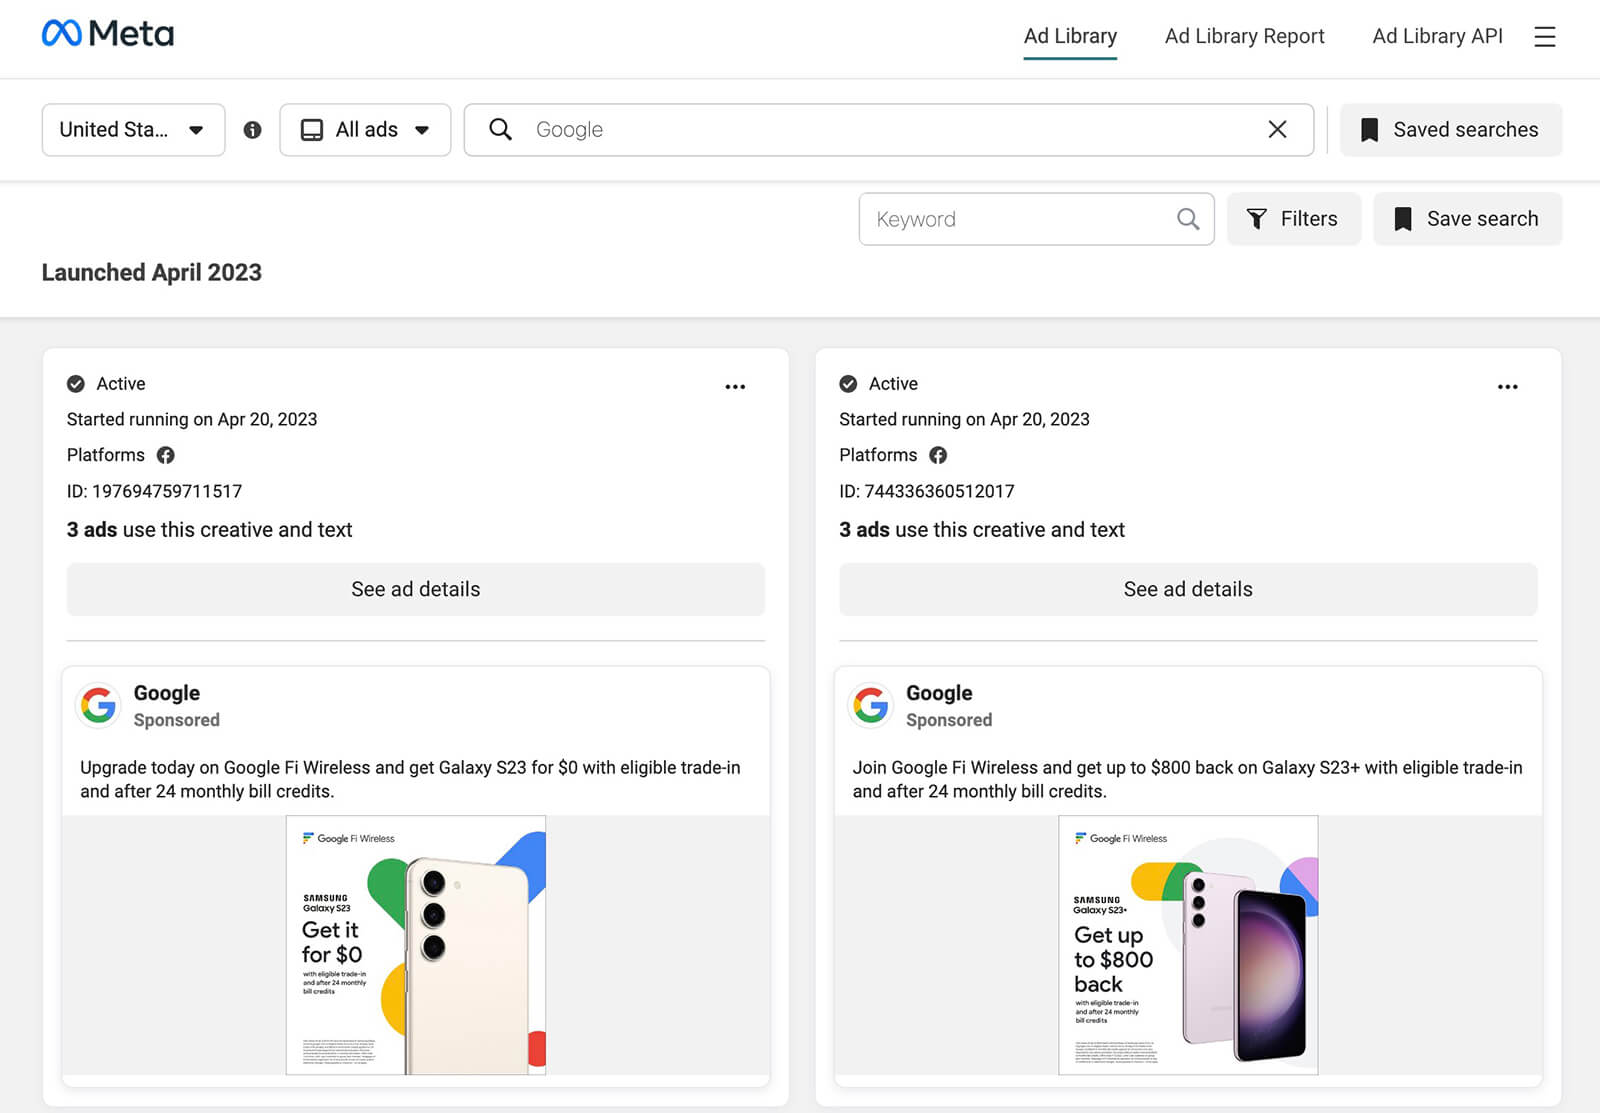 google-ads-transparency-center-meta-ad-library-api-saved-searches-ads-launched-april-3